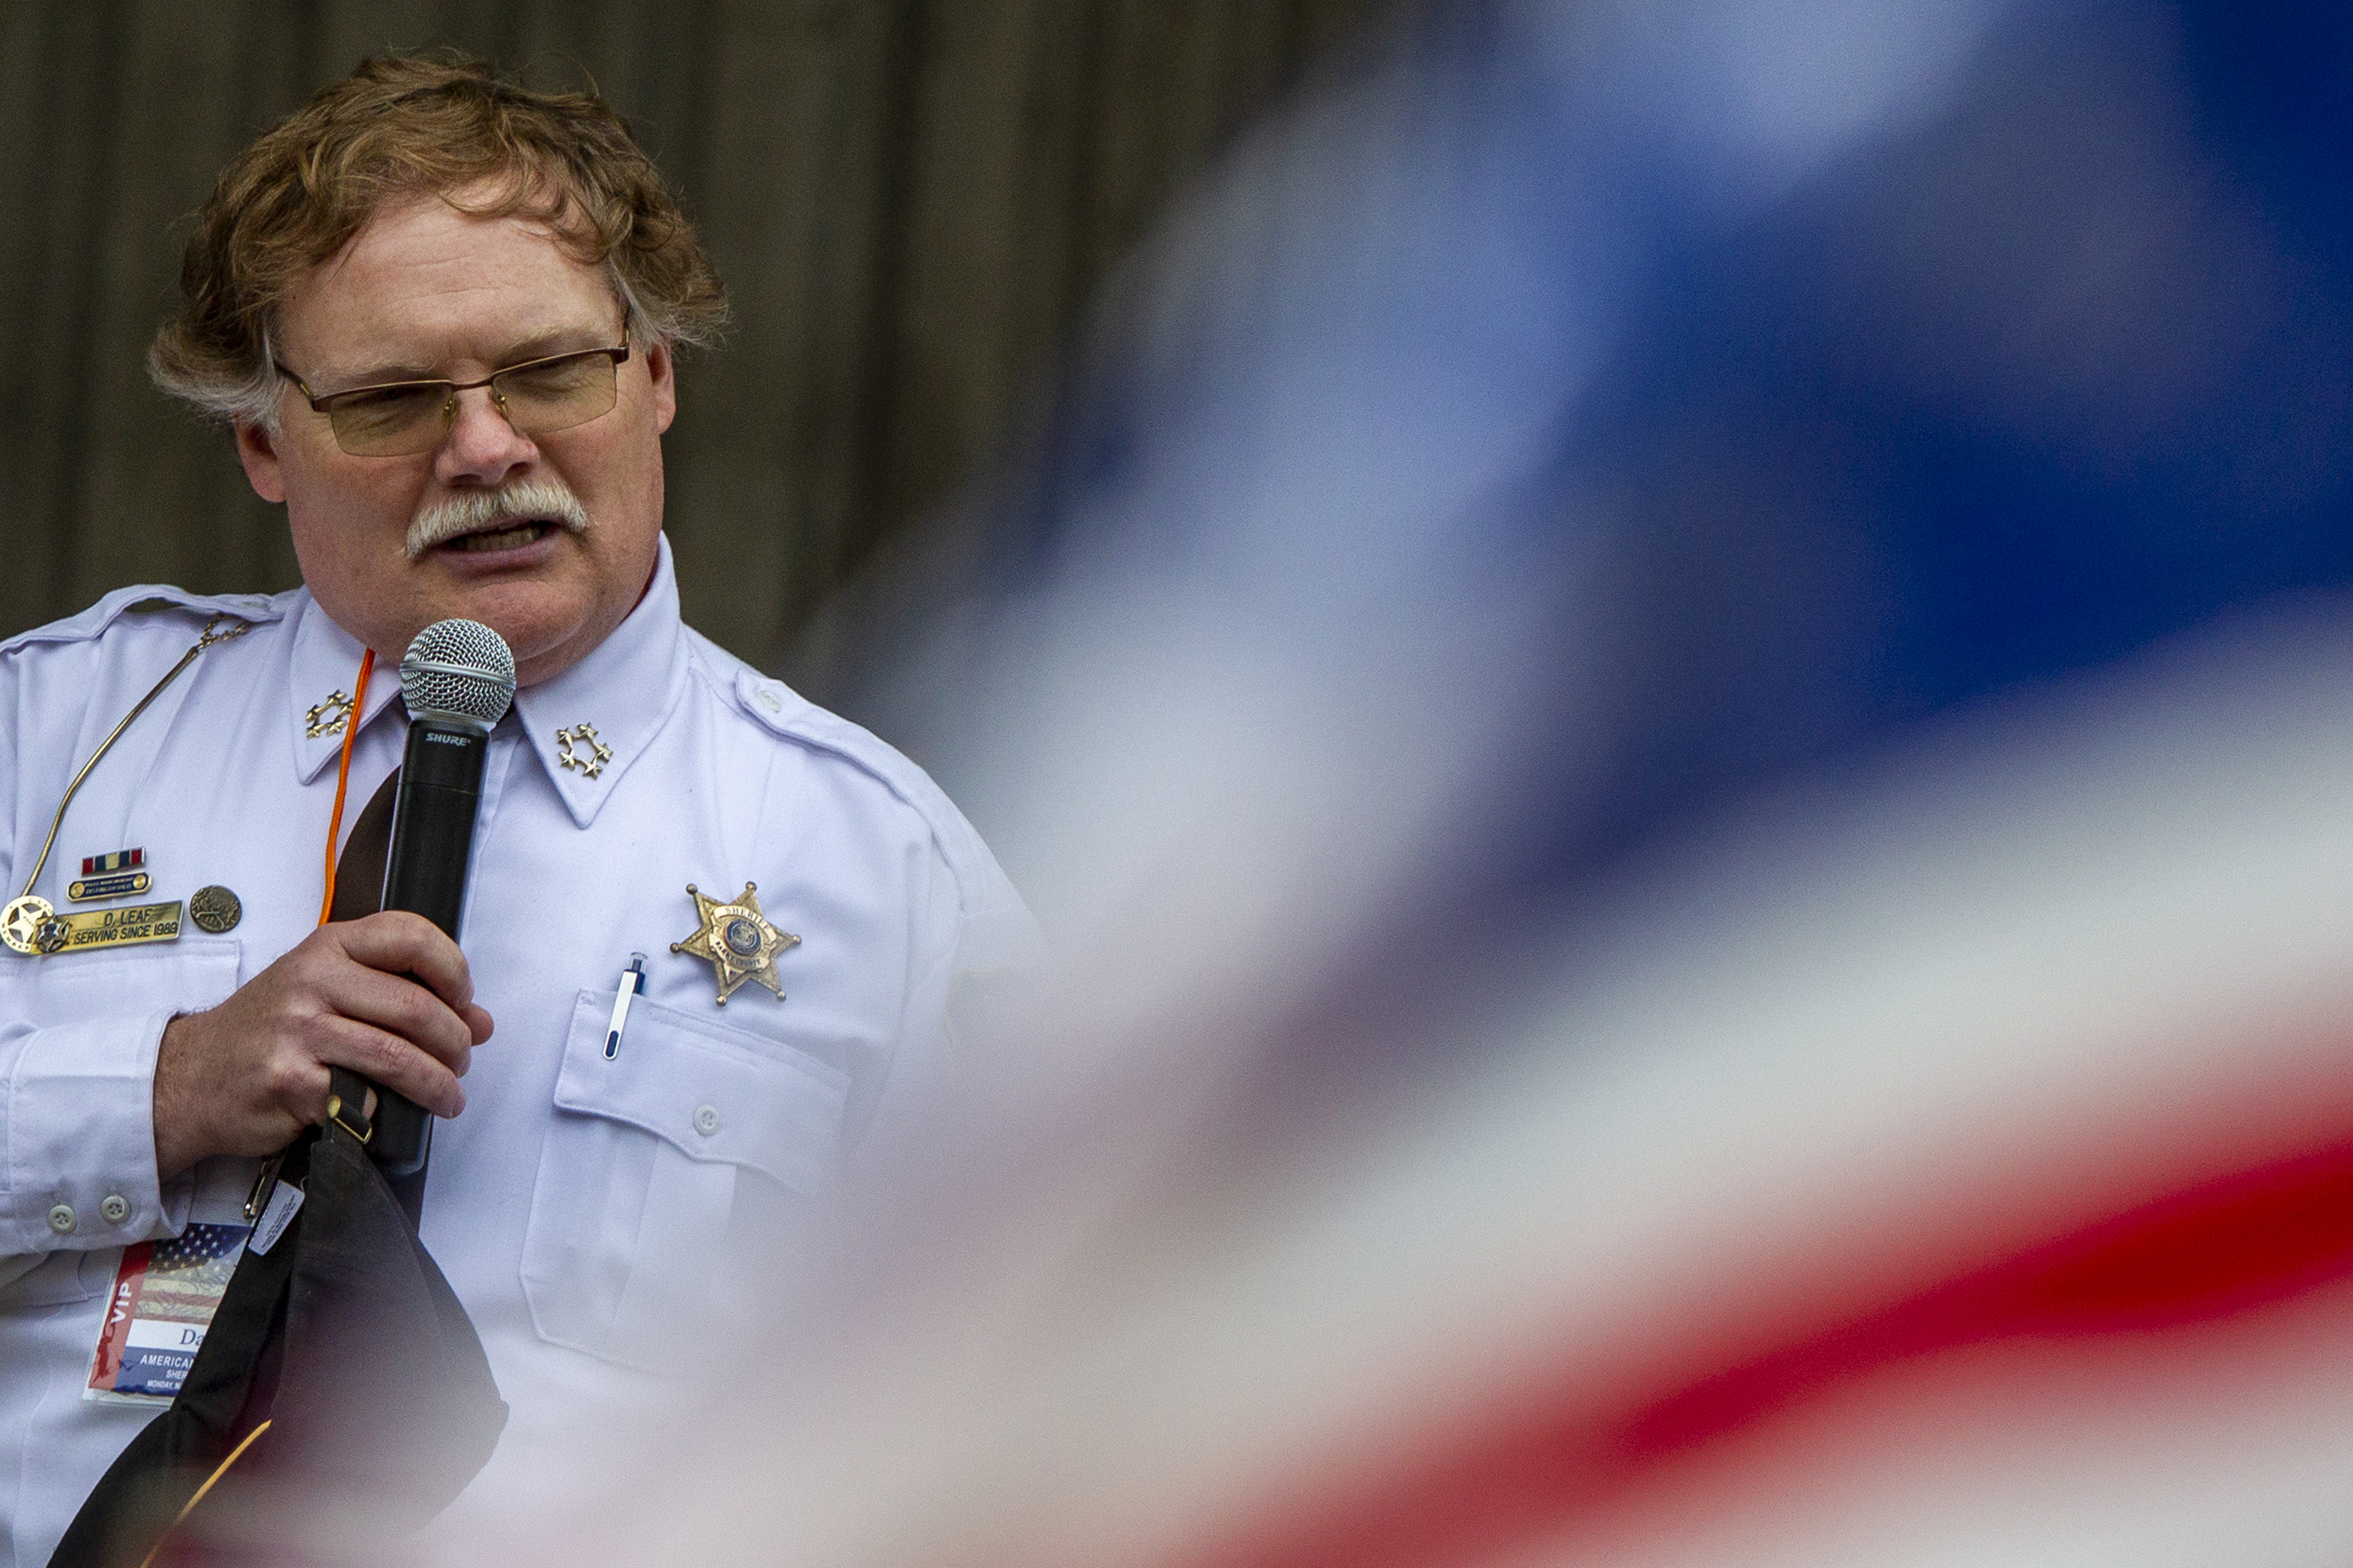 Barry County Sheriff Dar Leaf speaks during the "American Patriot Rally-Sheriffs speak out" event at Rosa Parks Circle in downtown Grand Rapids on Monday, May 18, 2020. The crowd is protesting against Gov. Gretchen Whitmer's stay-at-home order. (Cory Morse | MLive.com)